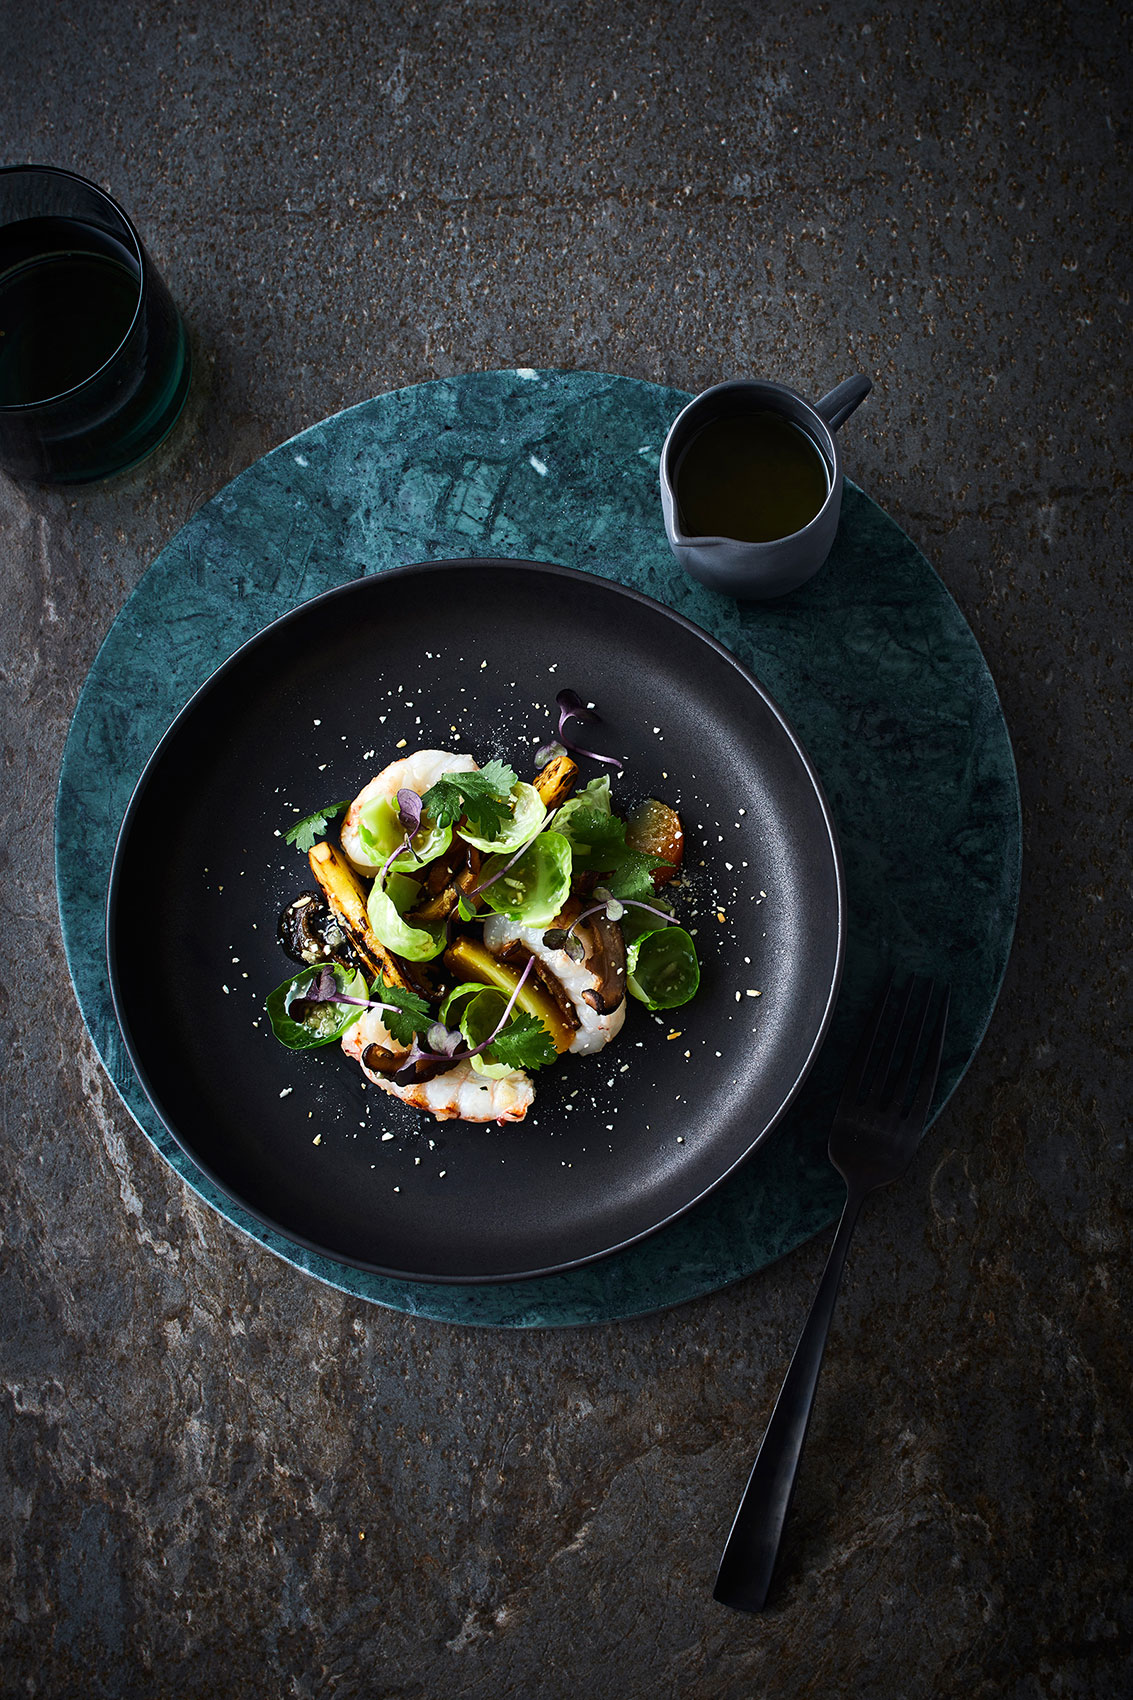 Scampi with Fresh Greens & Winter Vegetables on Dark Plate • Advertising & Editorial Food Photography